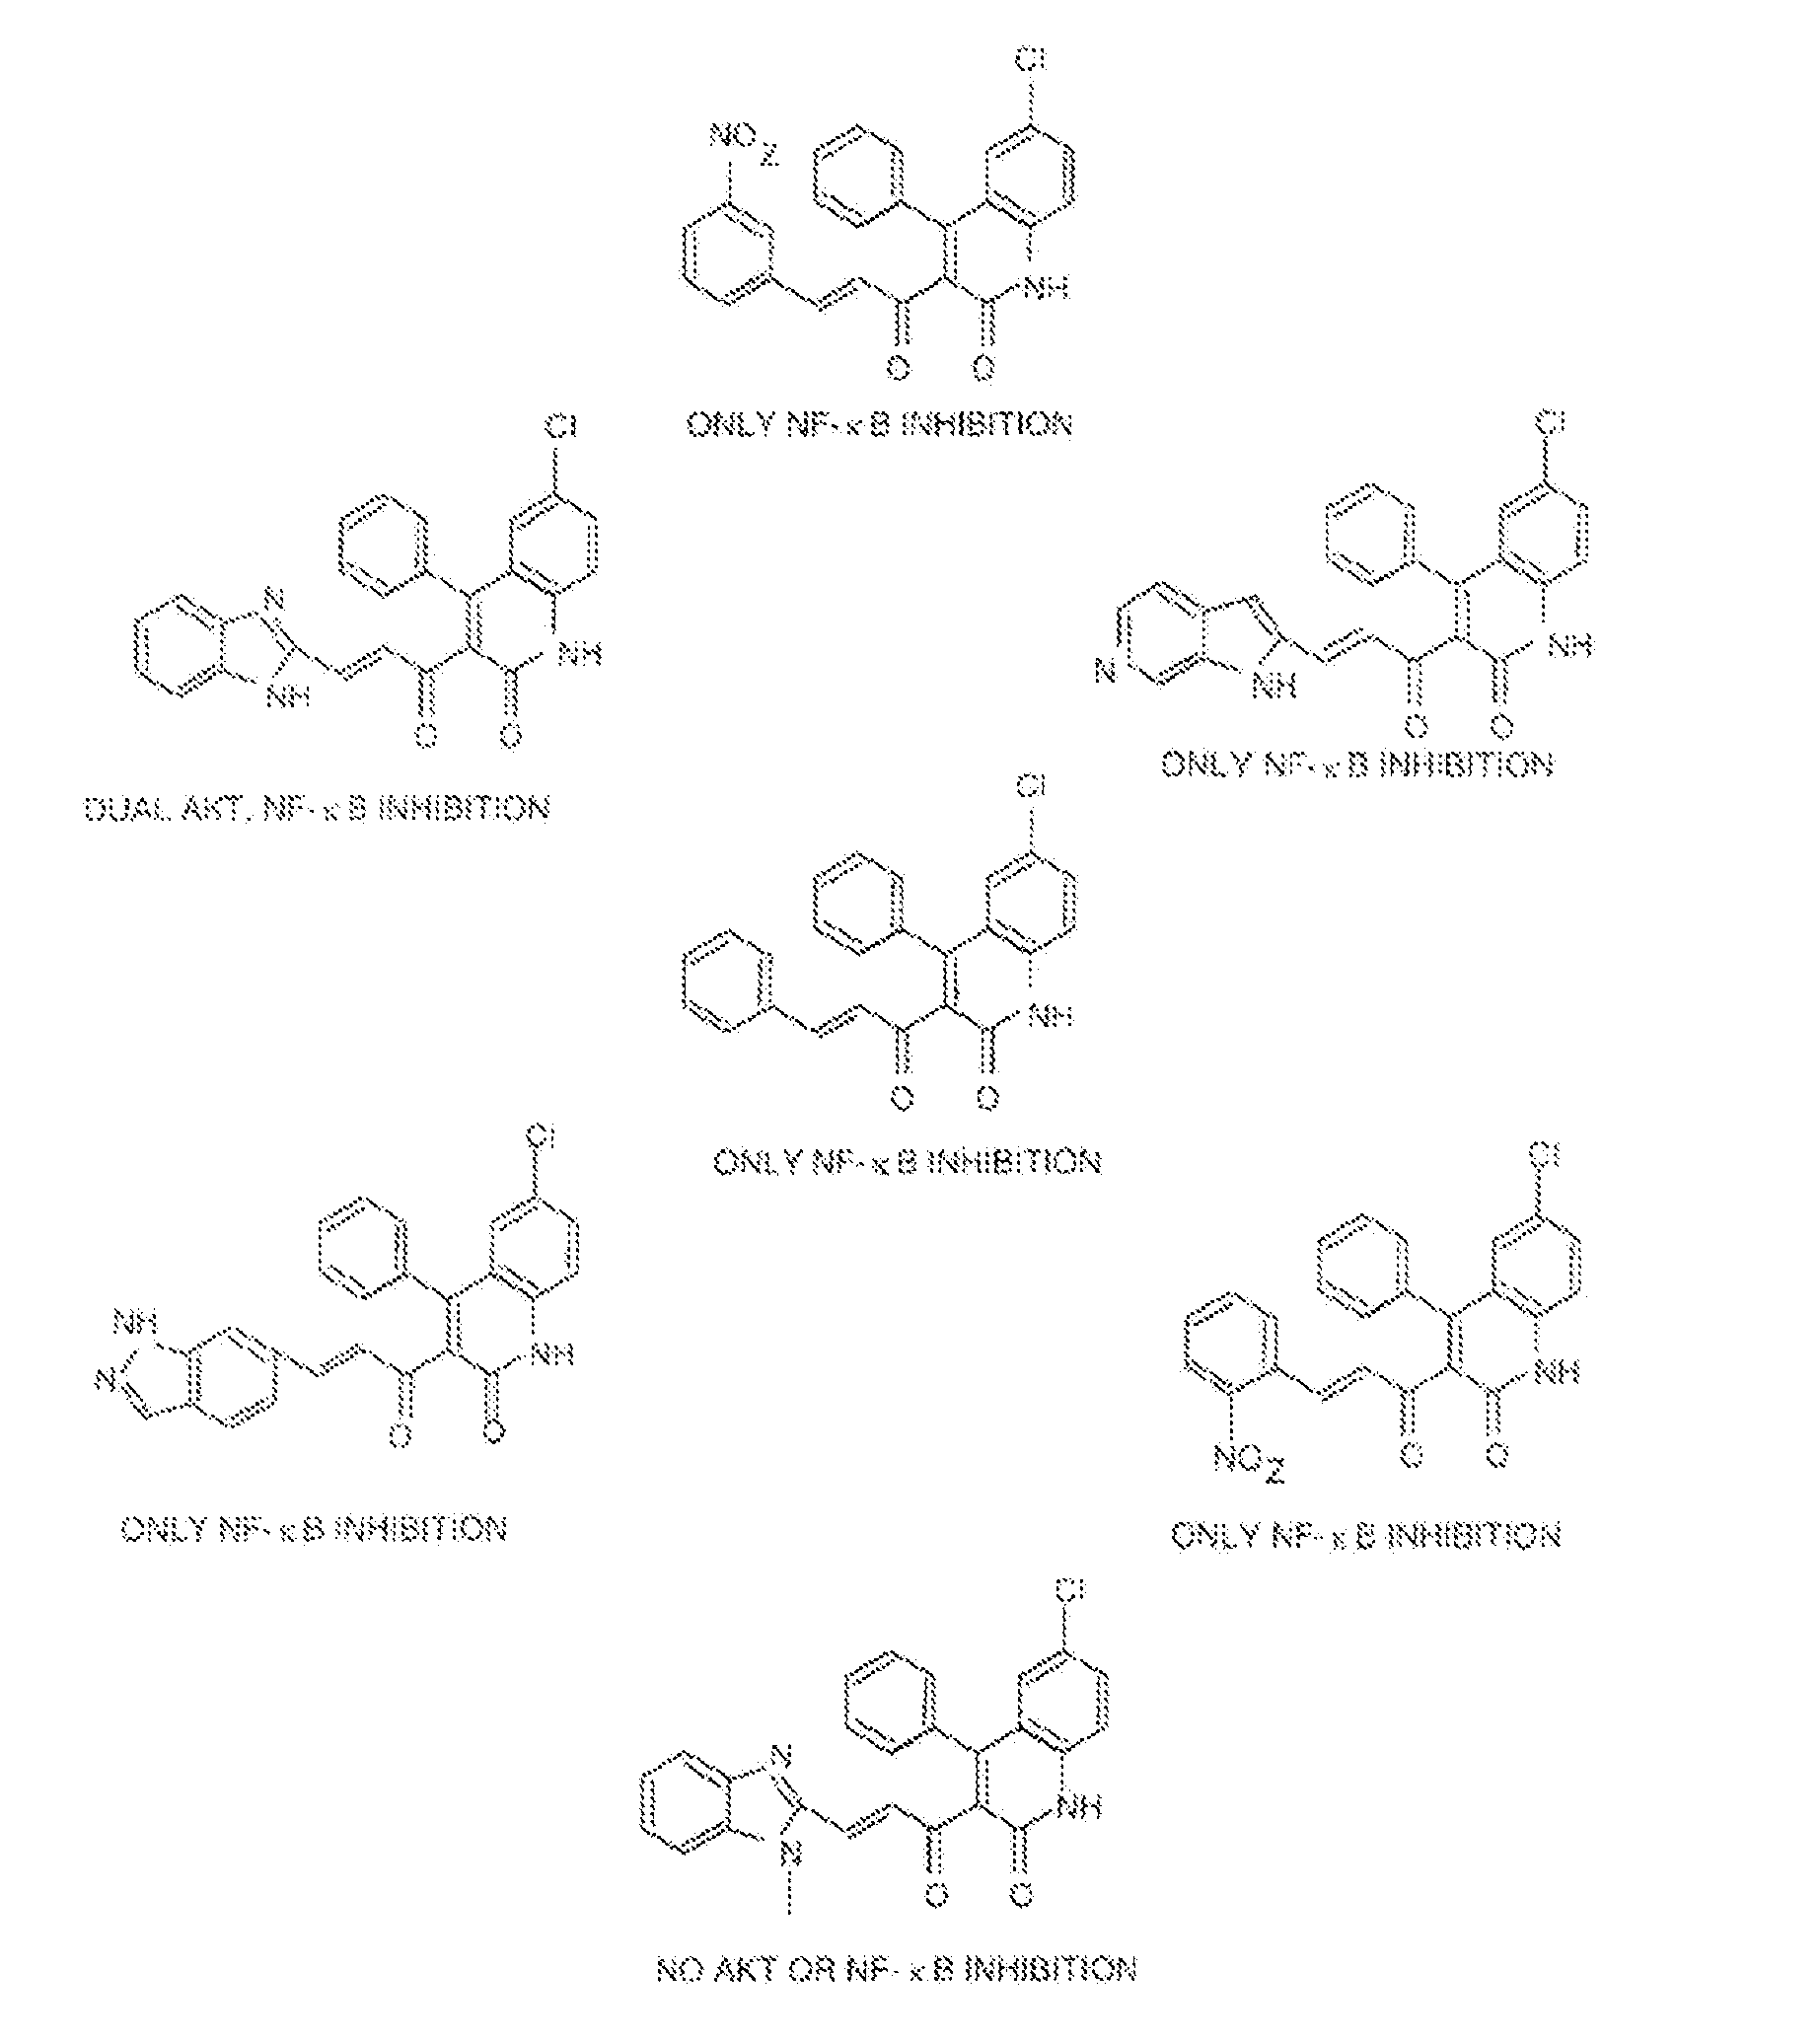 Selective inhibitors of akt and methods of using same